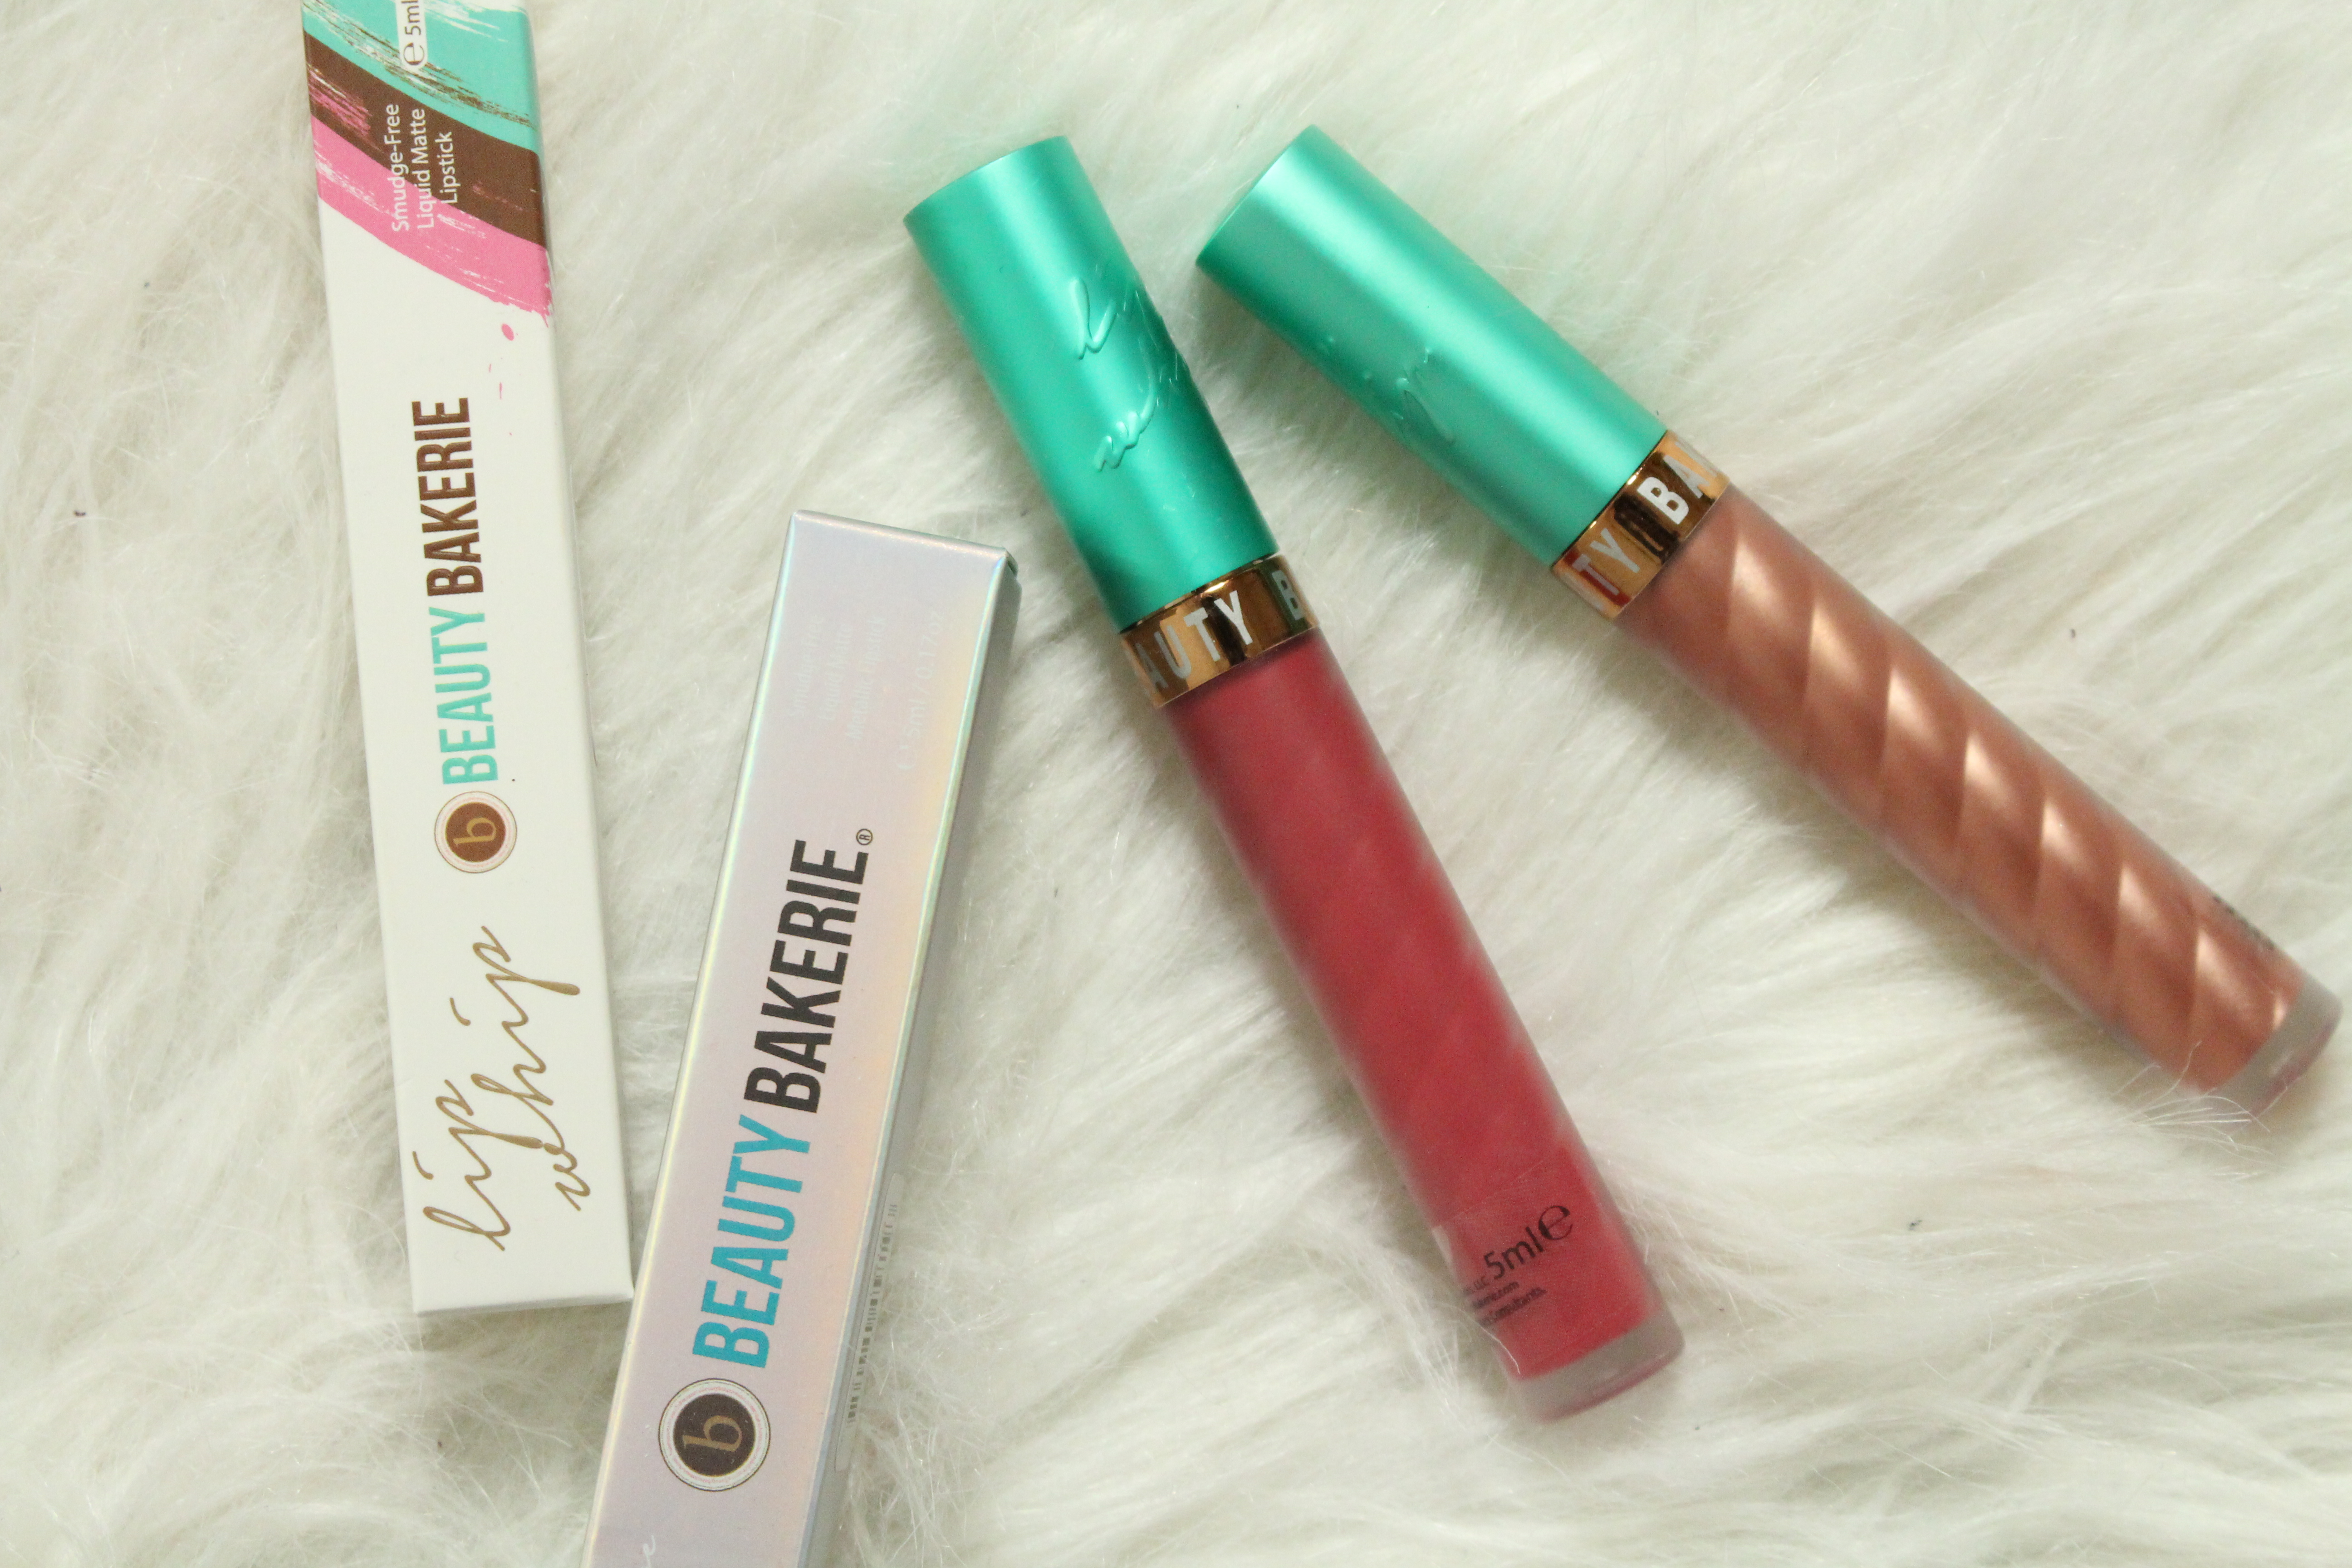 Beauty Bakerie Lip Whip review | Take Me For Pomegranate & Rose Pose